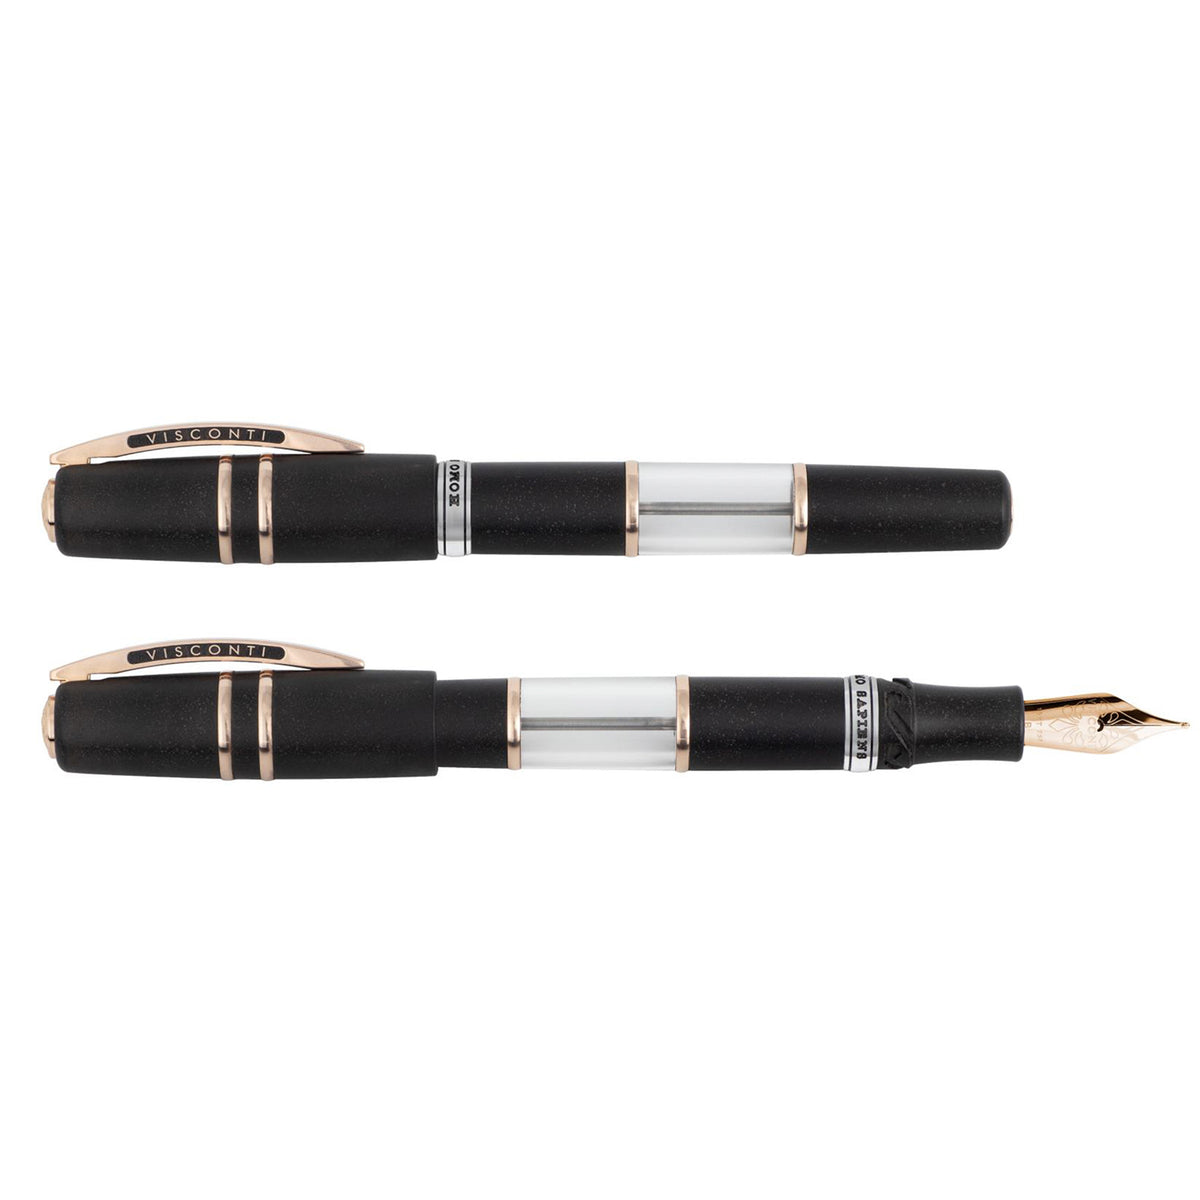 Two Coles of London Visconti Homo Sapiens Crystal Dream Fountain Pens on a white background.